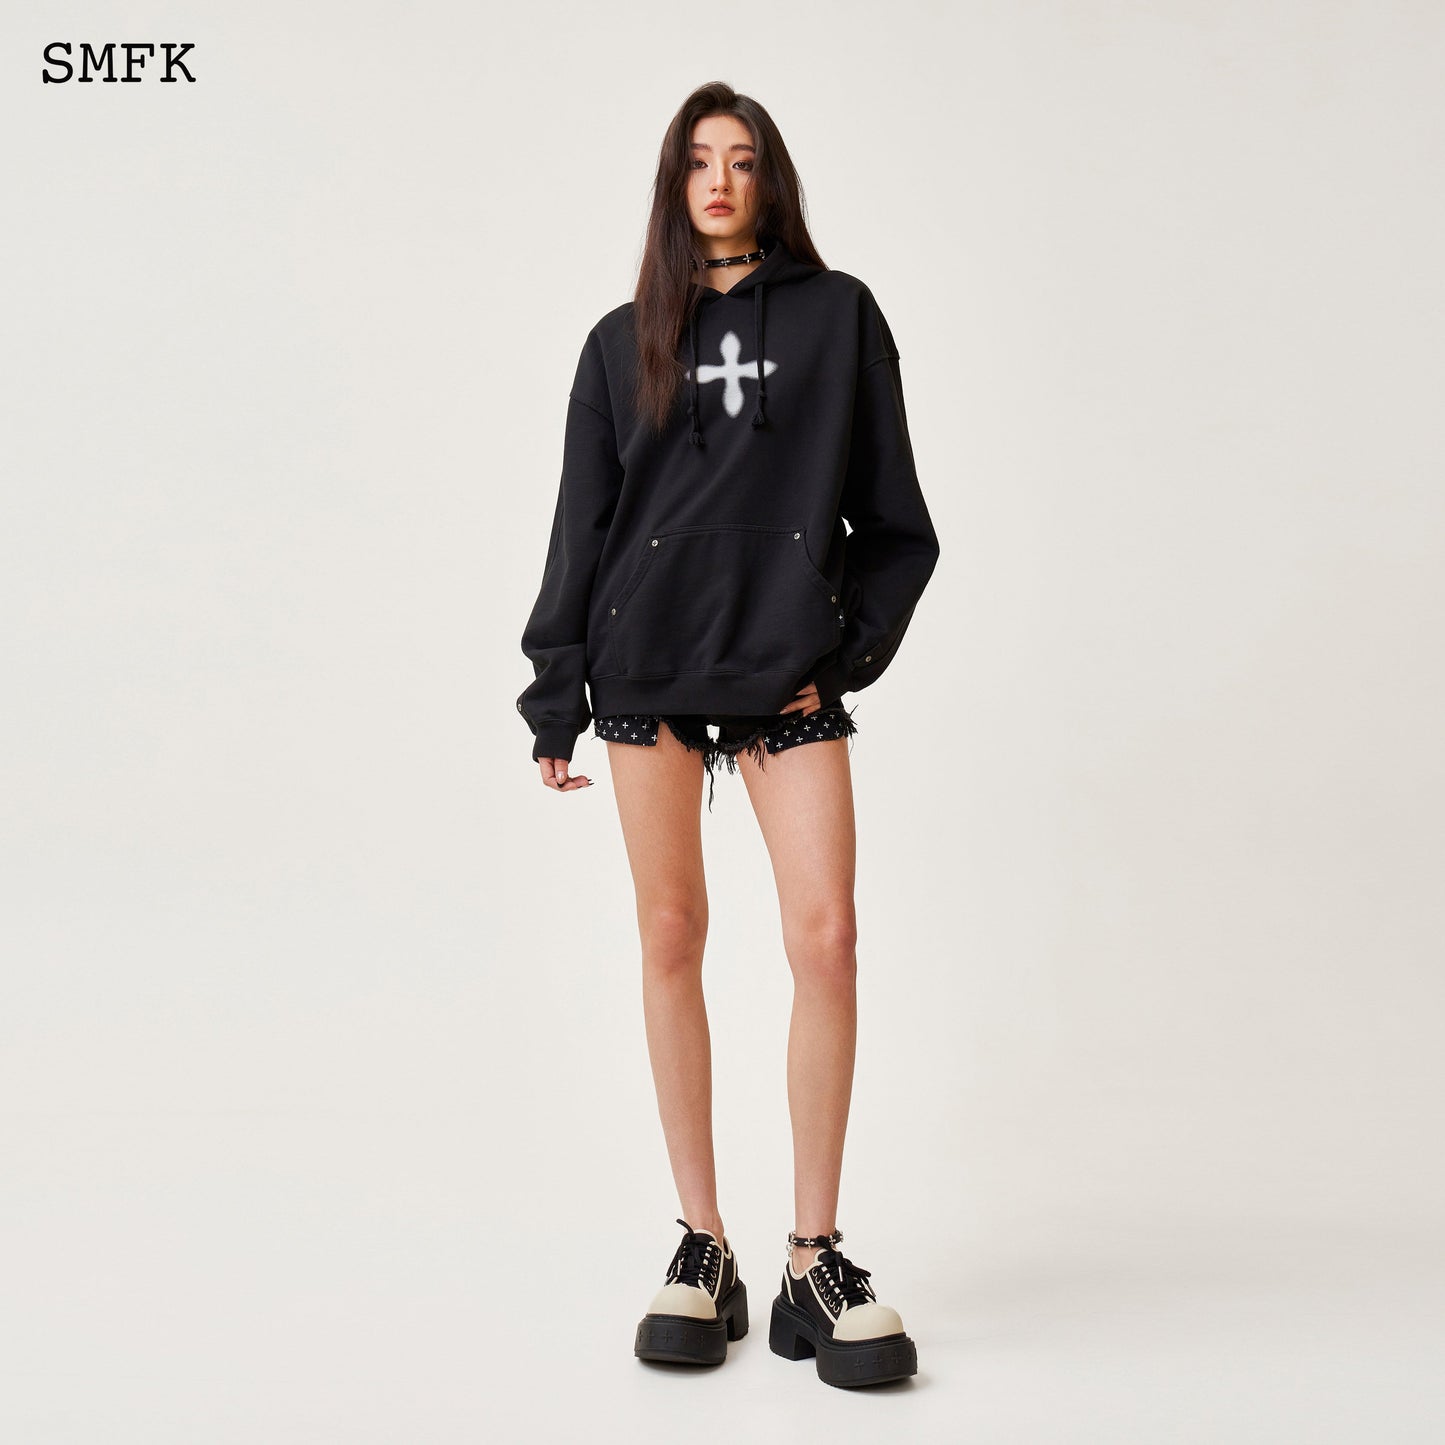 SMFK Compass Rider Low-Top Boots In Black And White